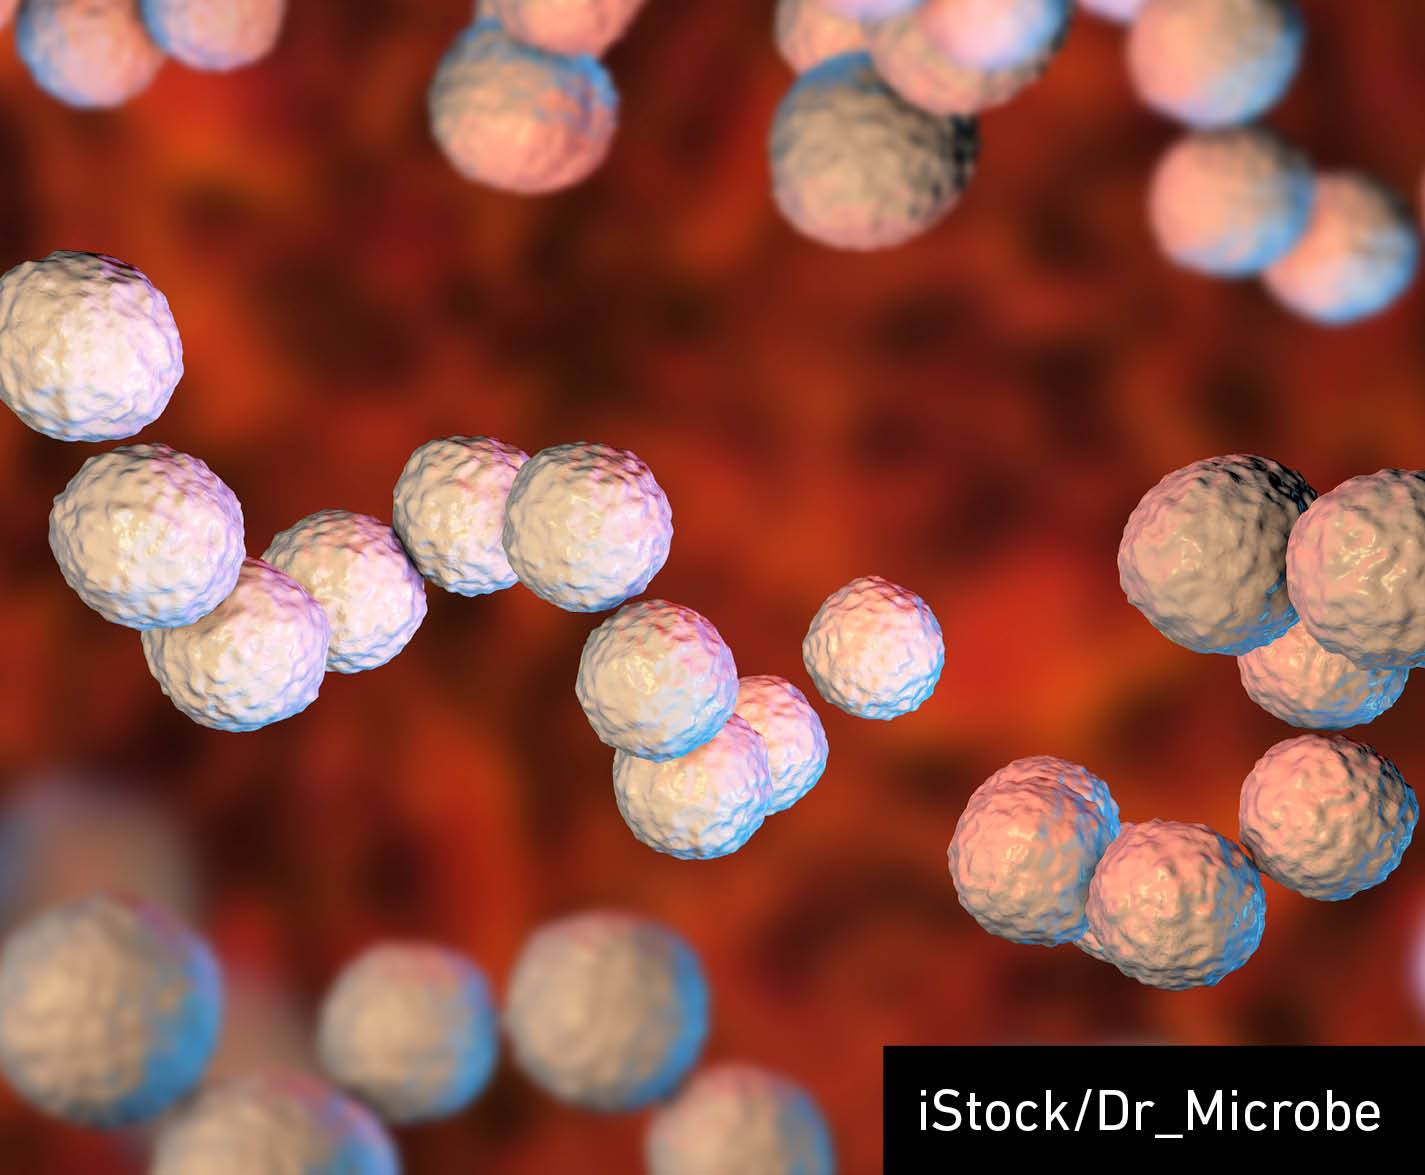 Gram-positive bacteria Streptococcus pyogenes which cause Scarlet fever and other infections, 3D illustration